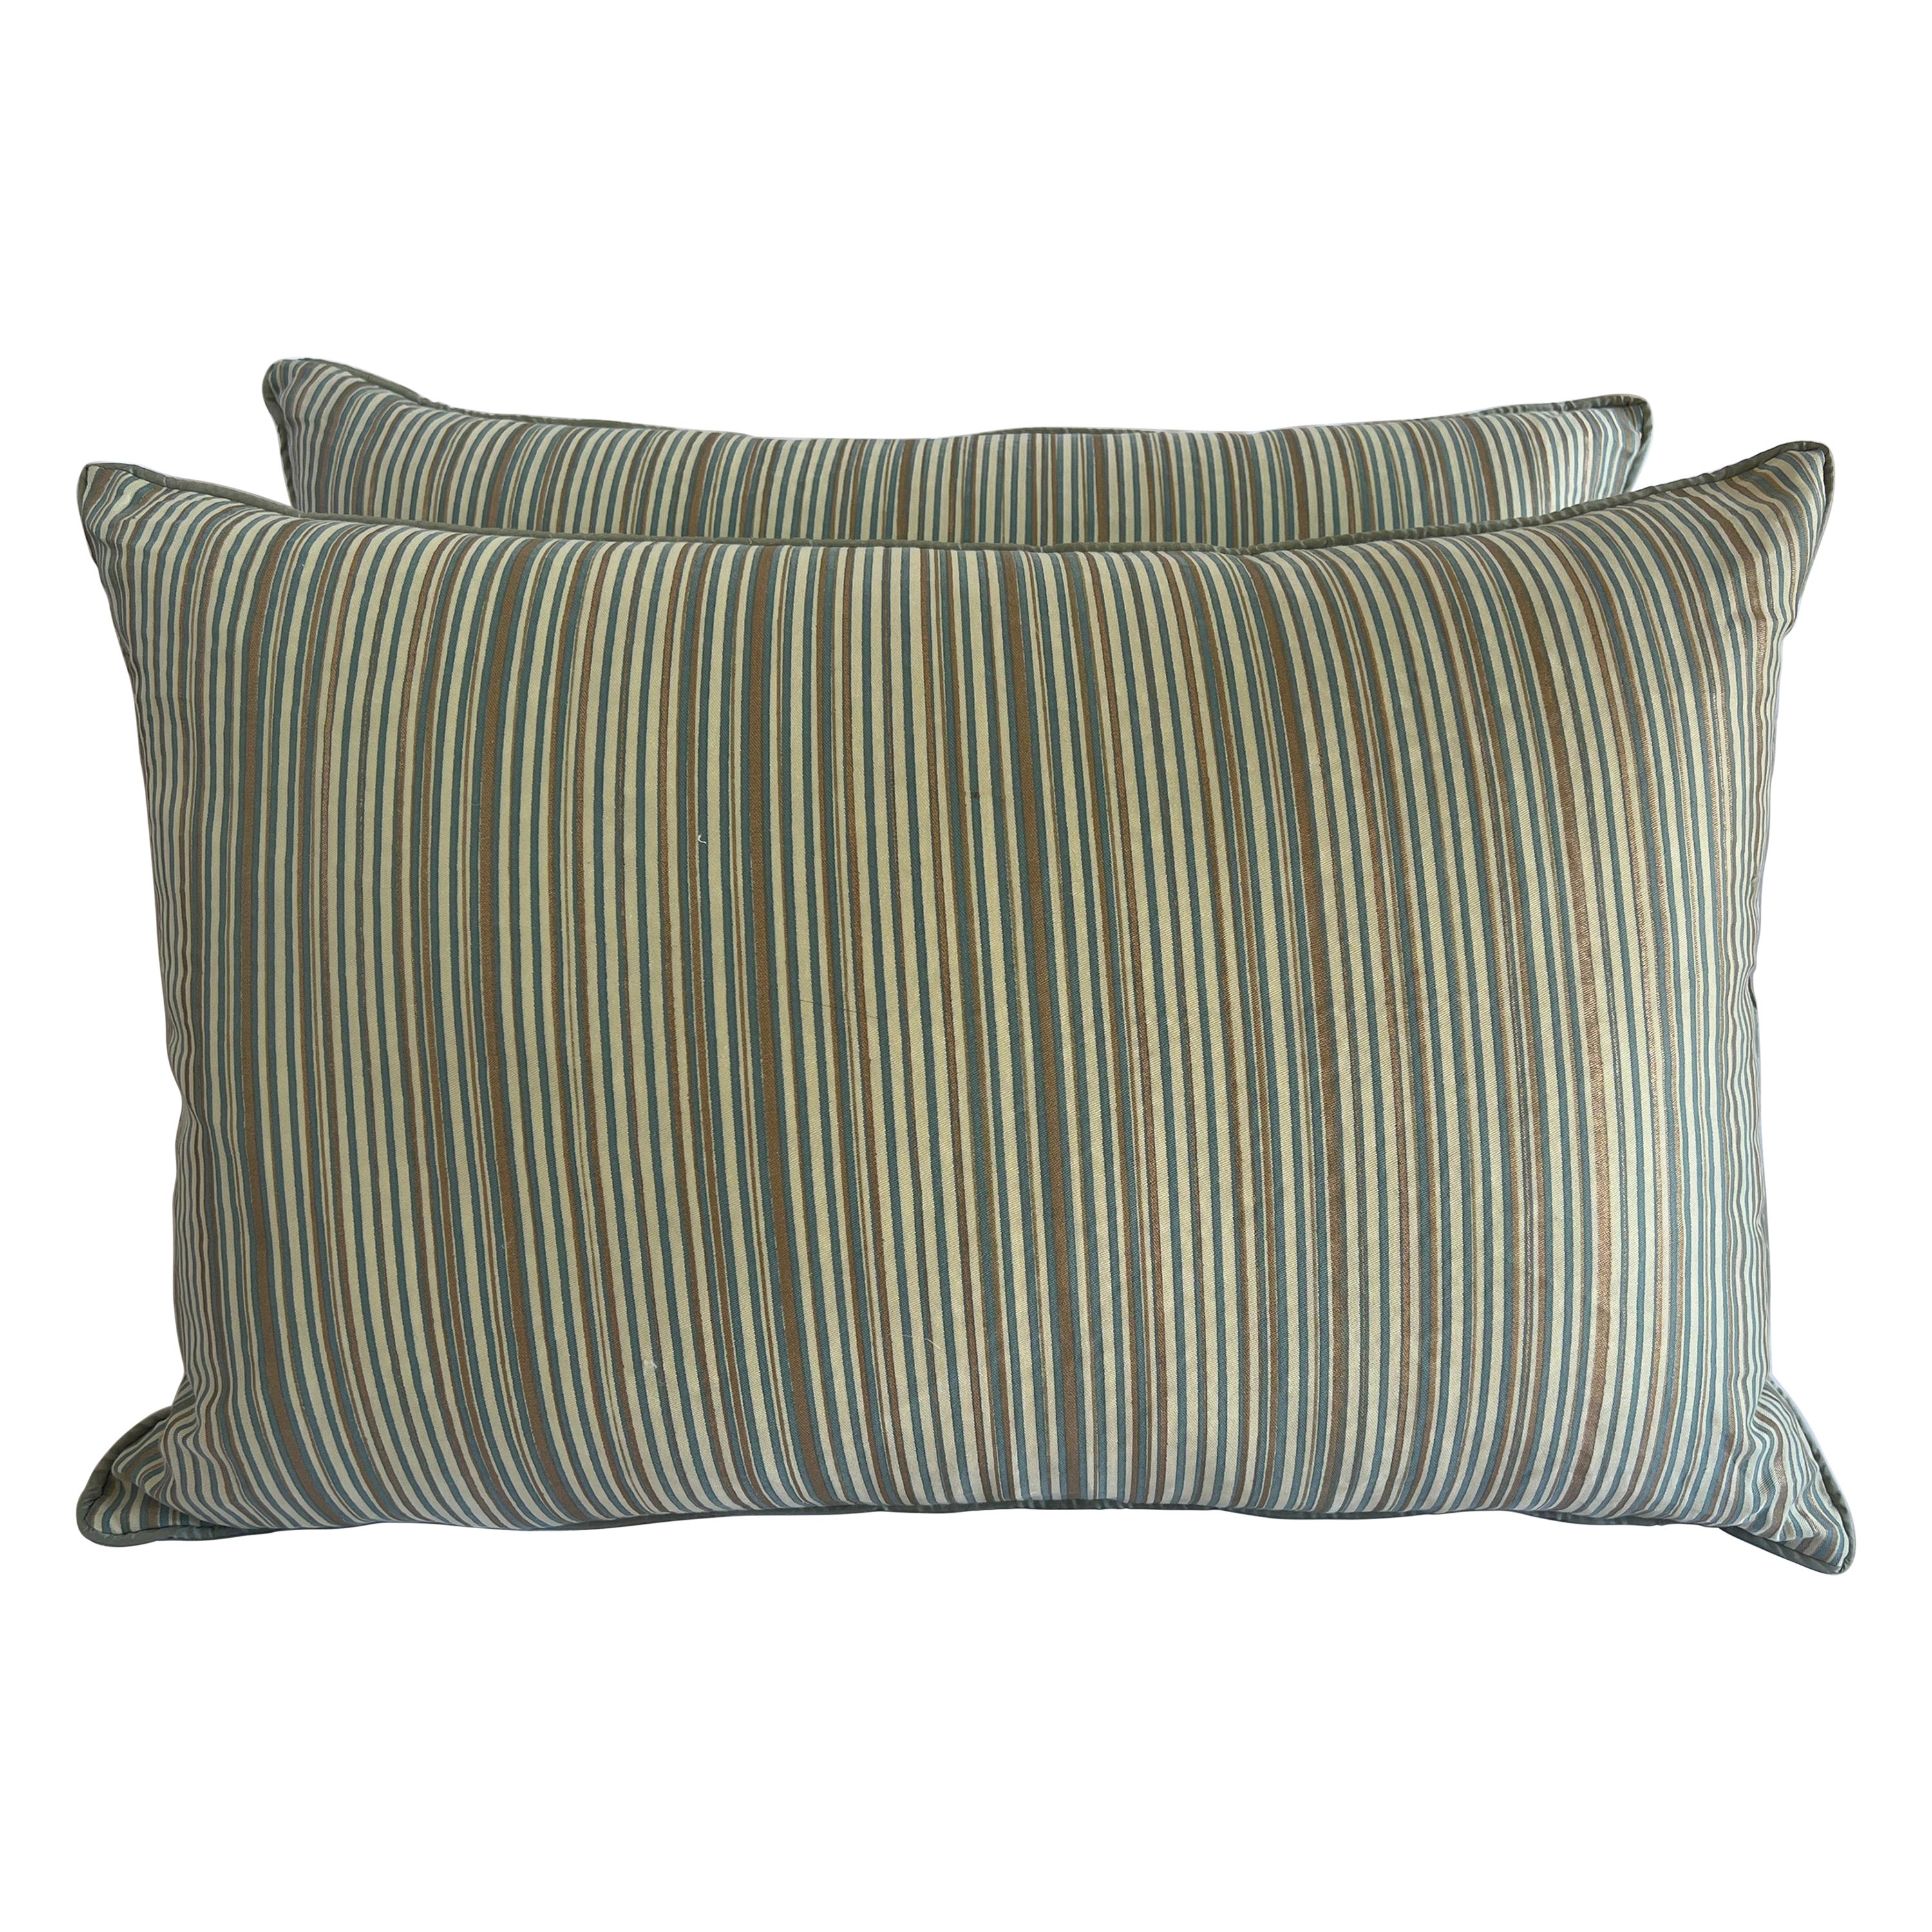 Pair of Unique Striped Fortuny Textile Pillows